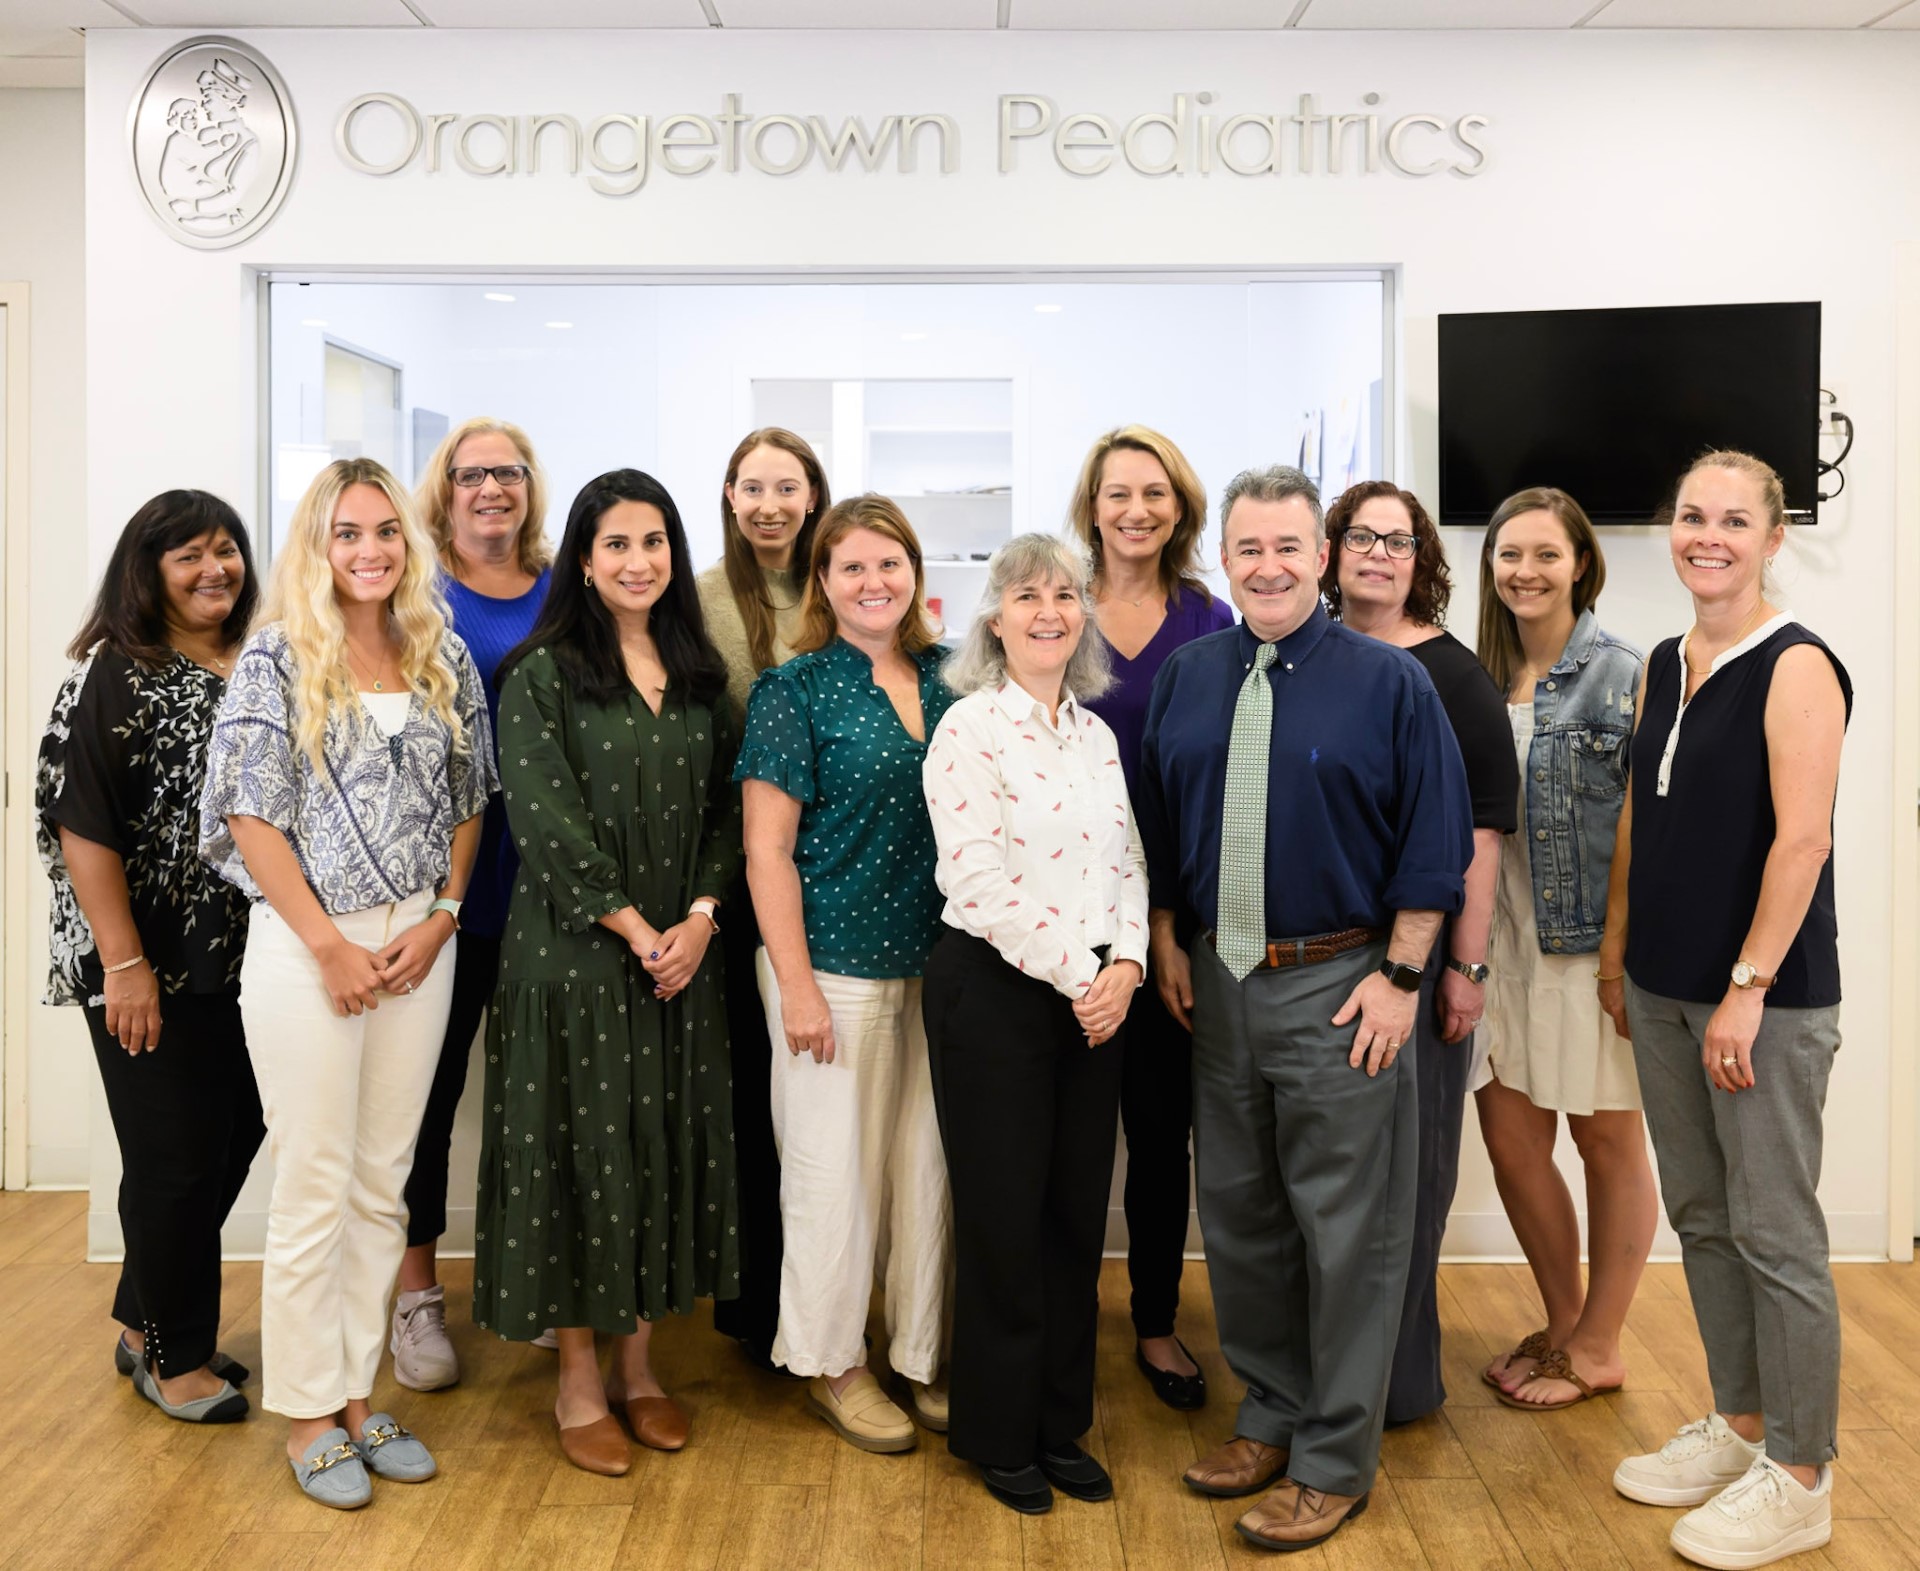 a group of medical professionals smiling at the camera in front of a sign that says 'orangetown pediatrics'